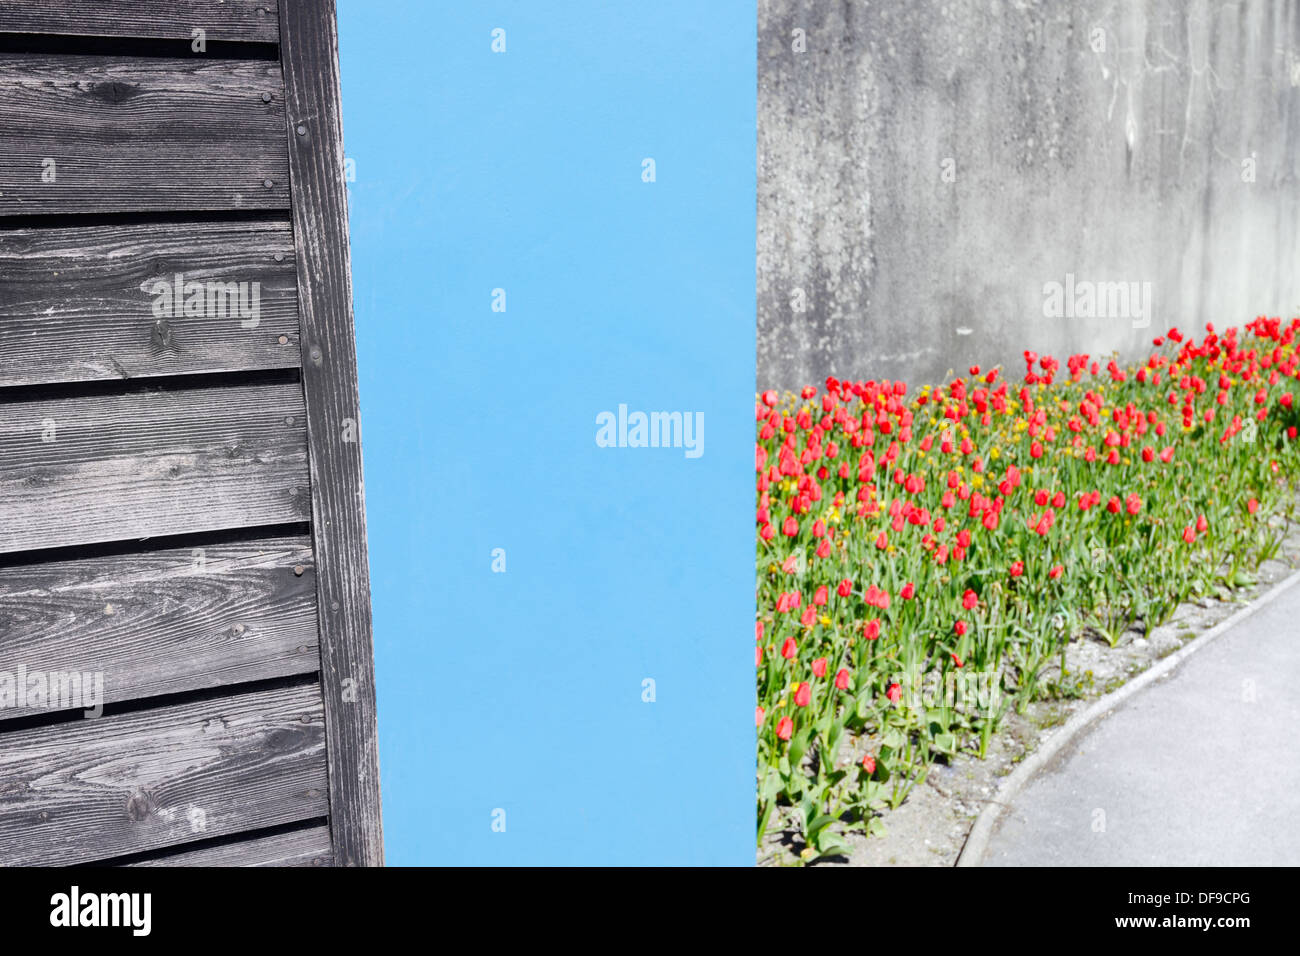 Wooden shed, blue wall and red flowers with concrete background. Colour and texture, Wales, UK. Stock Photo